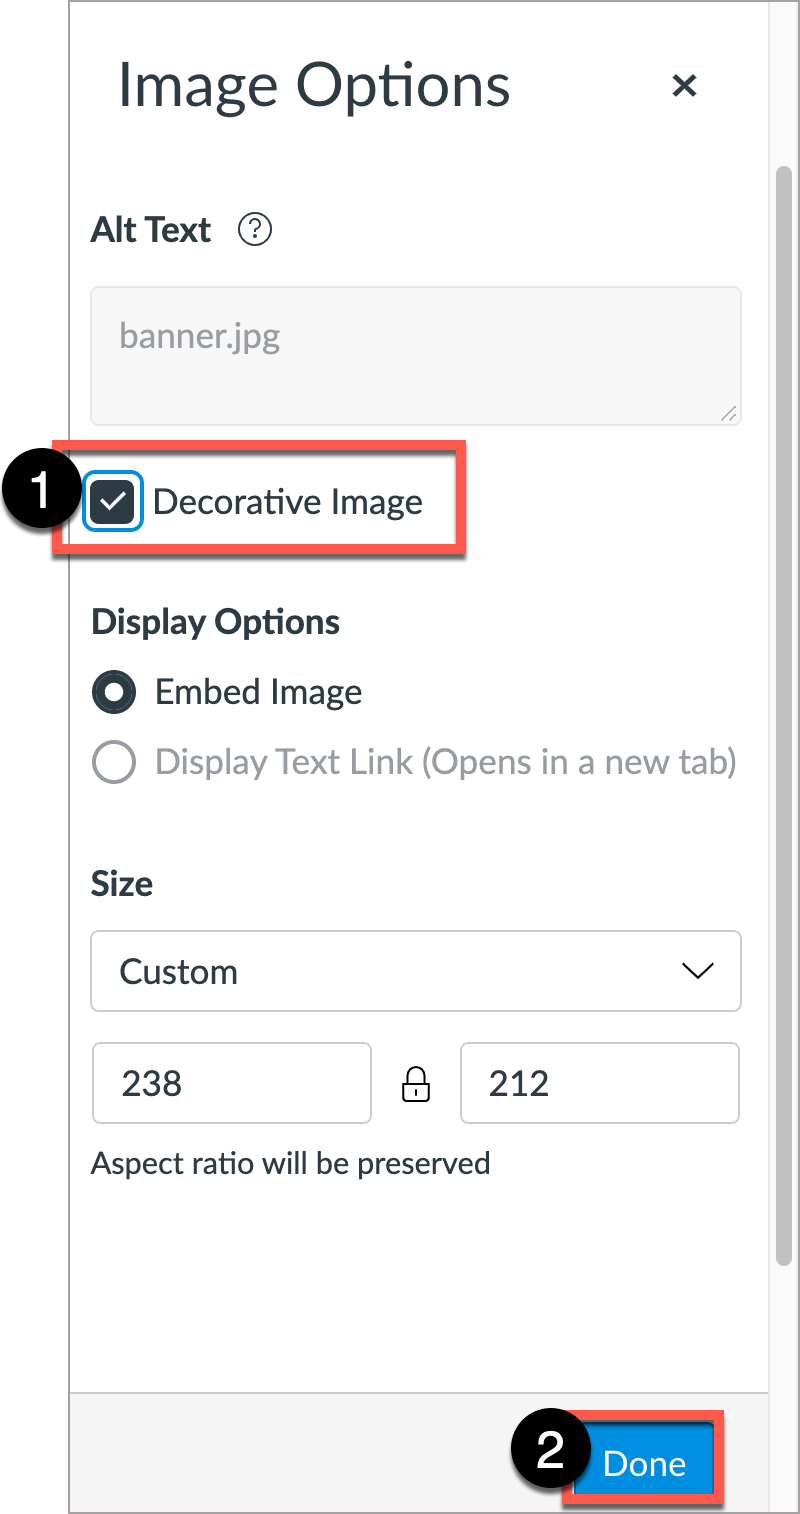 For decorative images, in Image Options window, select “Decorative Image” then select Done. 